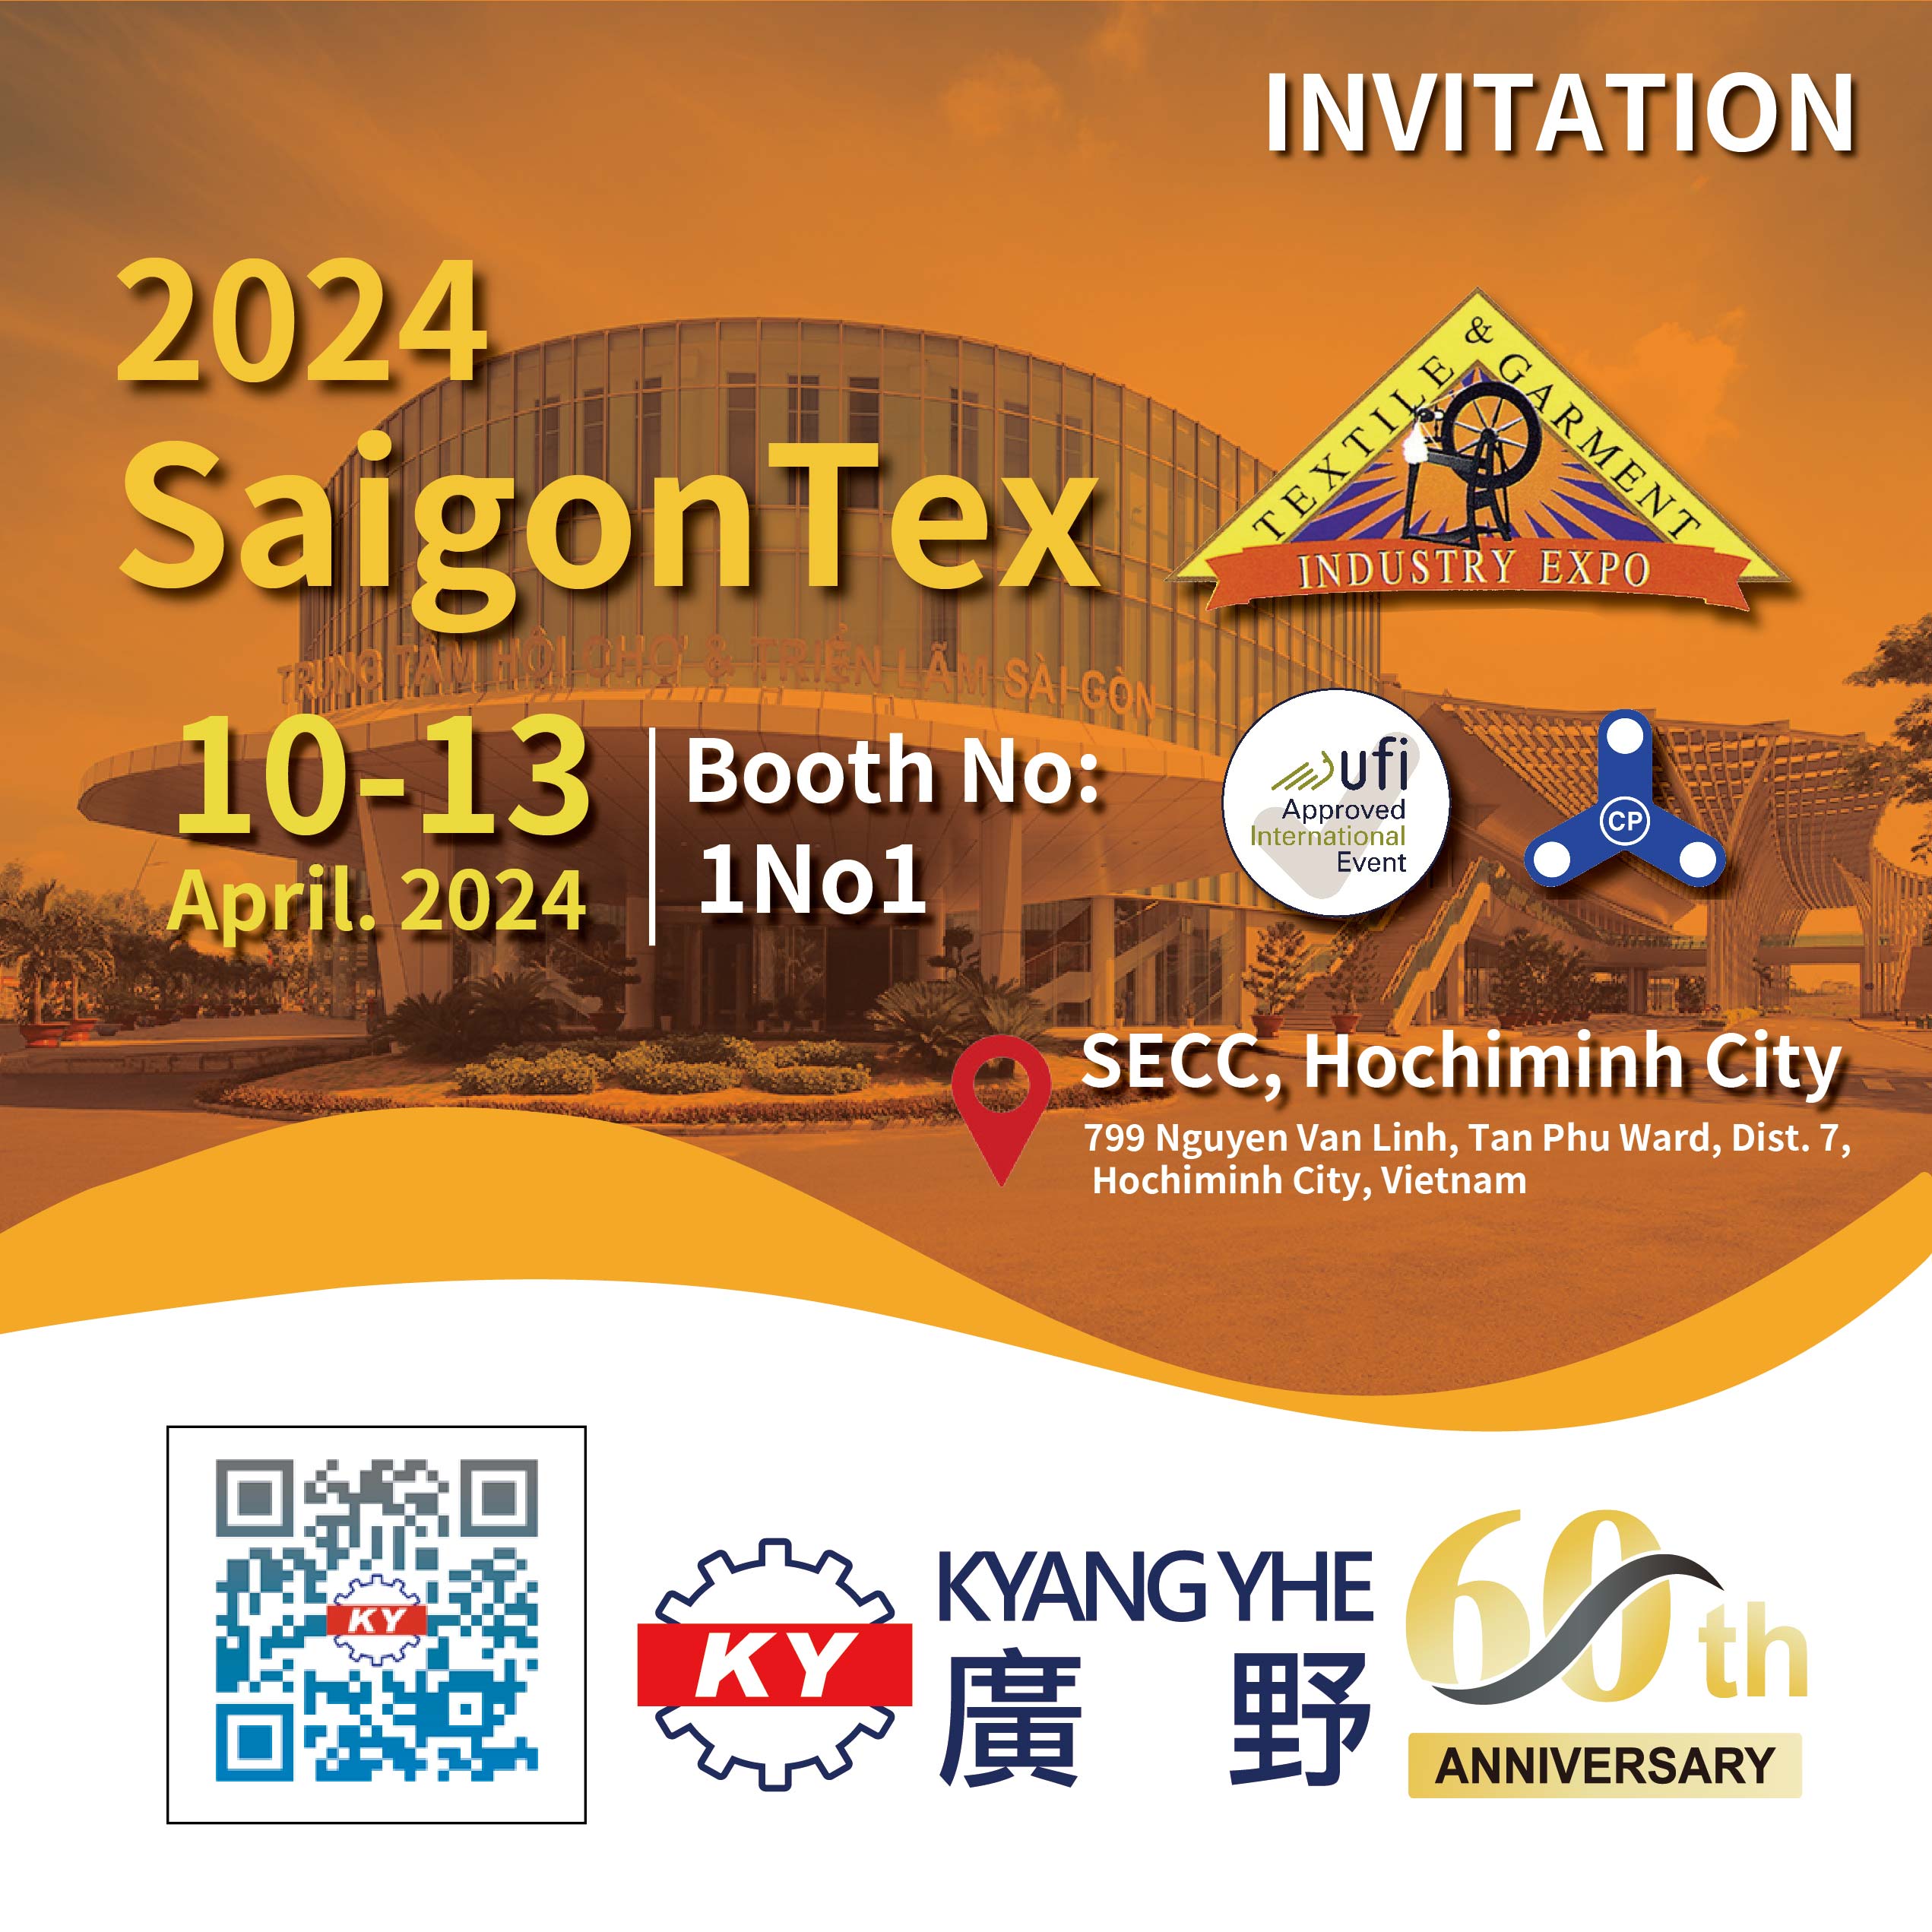 Kyang Yhe will participate in 2024 Vietnam Saigon Textile & Garment Industry Expo